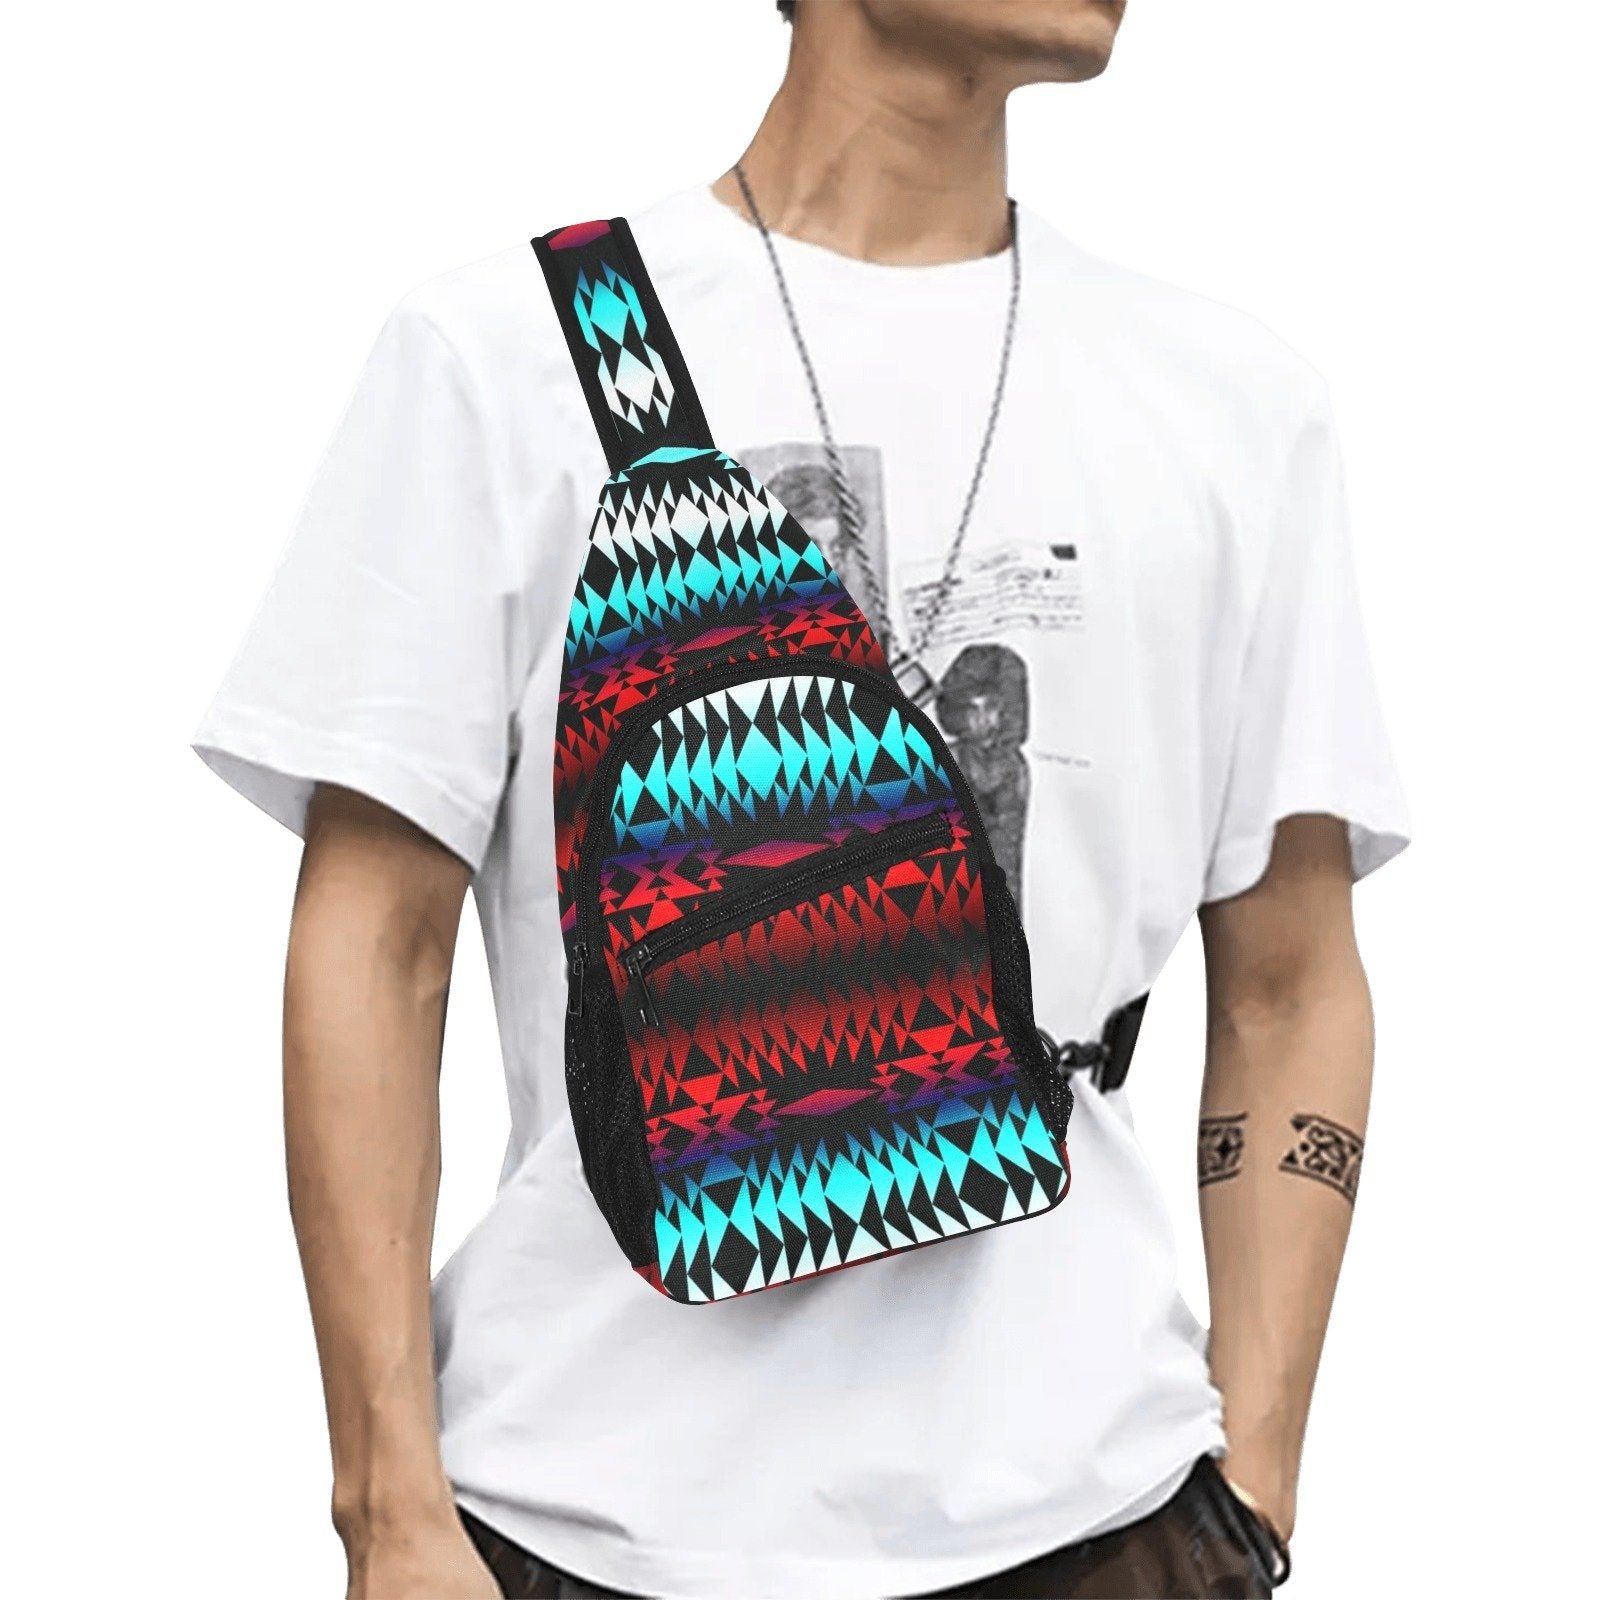 In Between Two Worlds All Over Print Chest Bag (Model 1719) All Over Print Chest Bag (1719) e-joyer 